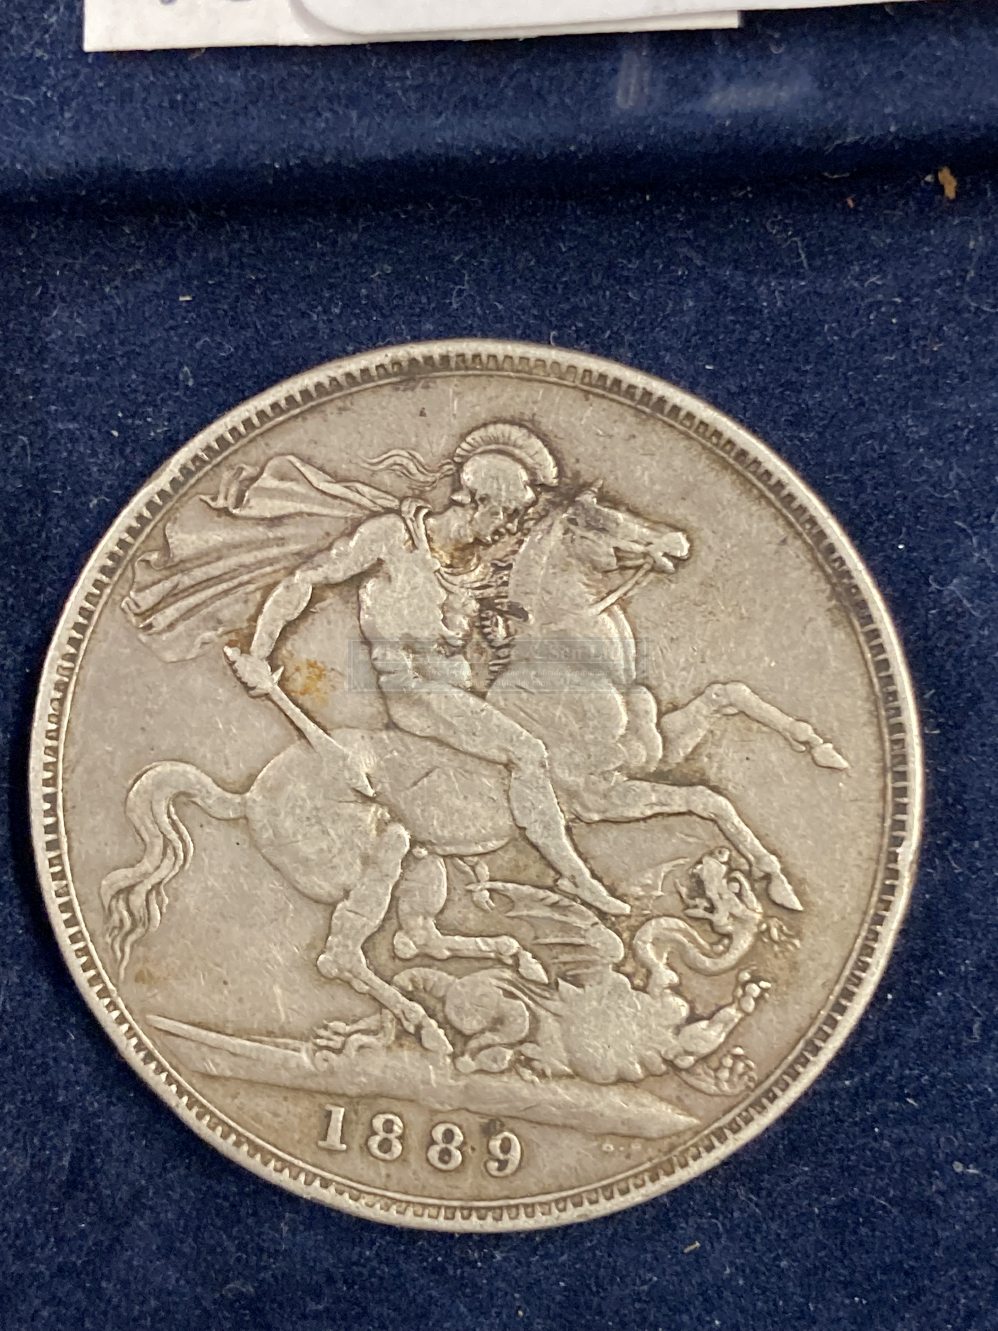 Numismatics: Crowns, 1889 George and Dragon, Young Head Crown, and a 1937 George VI Coat of Arms - Image 3 of 7